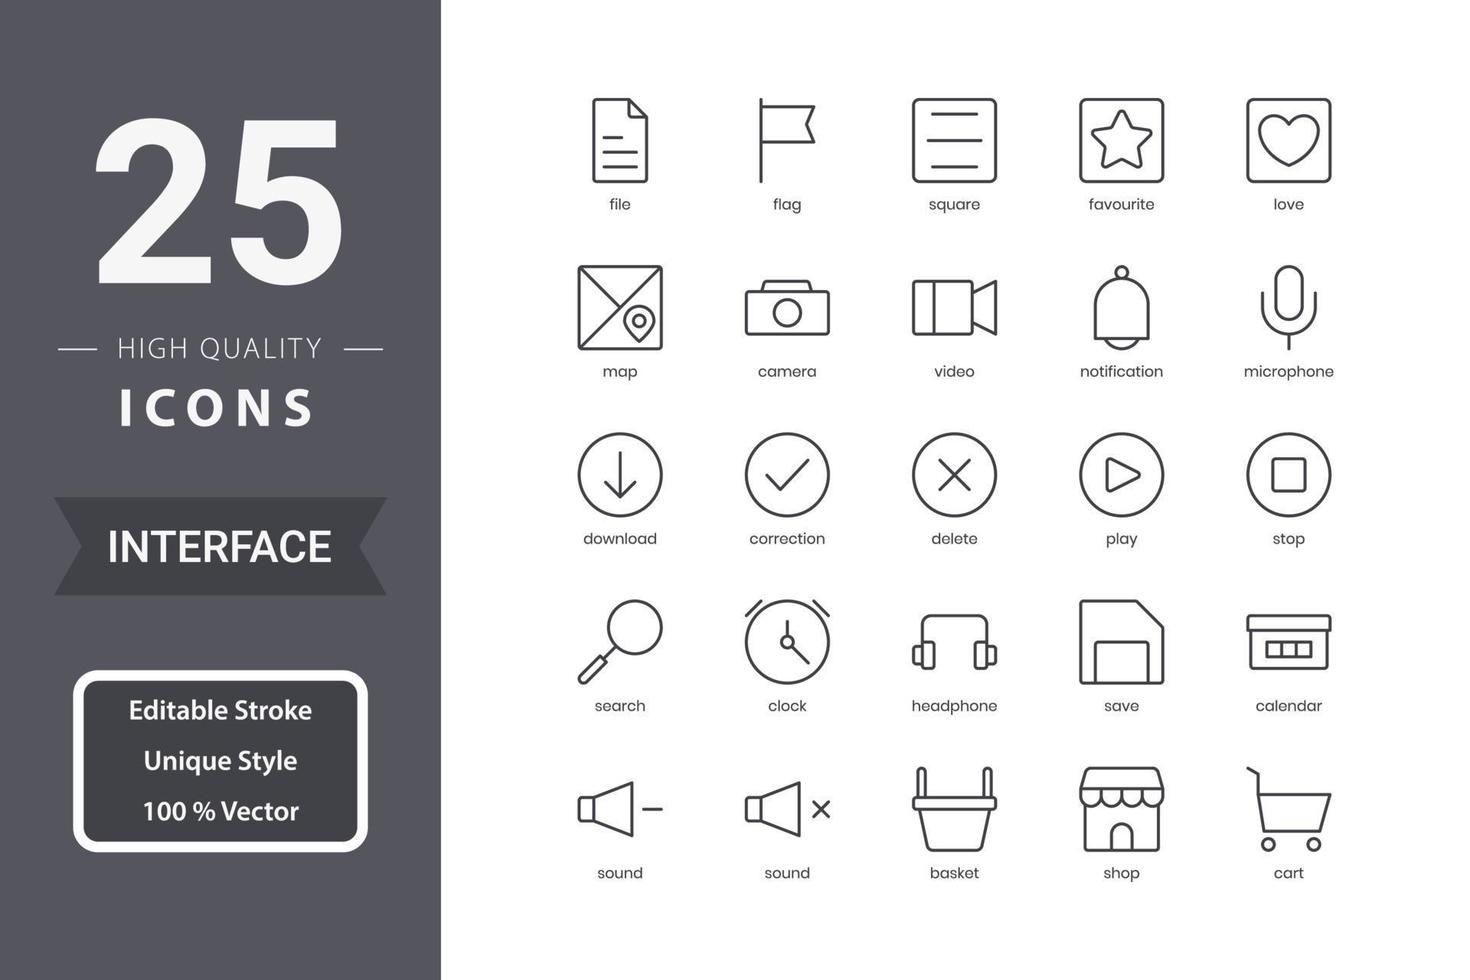 Interface icon pack for your website design, logo, app, UI. Interface icon outline design. vector